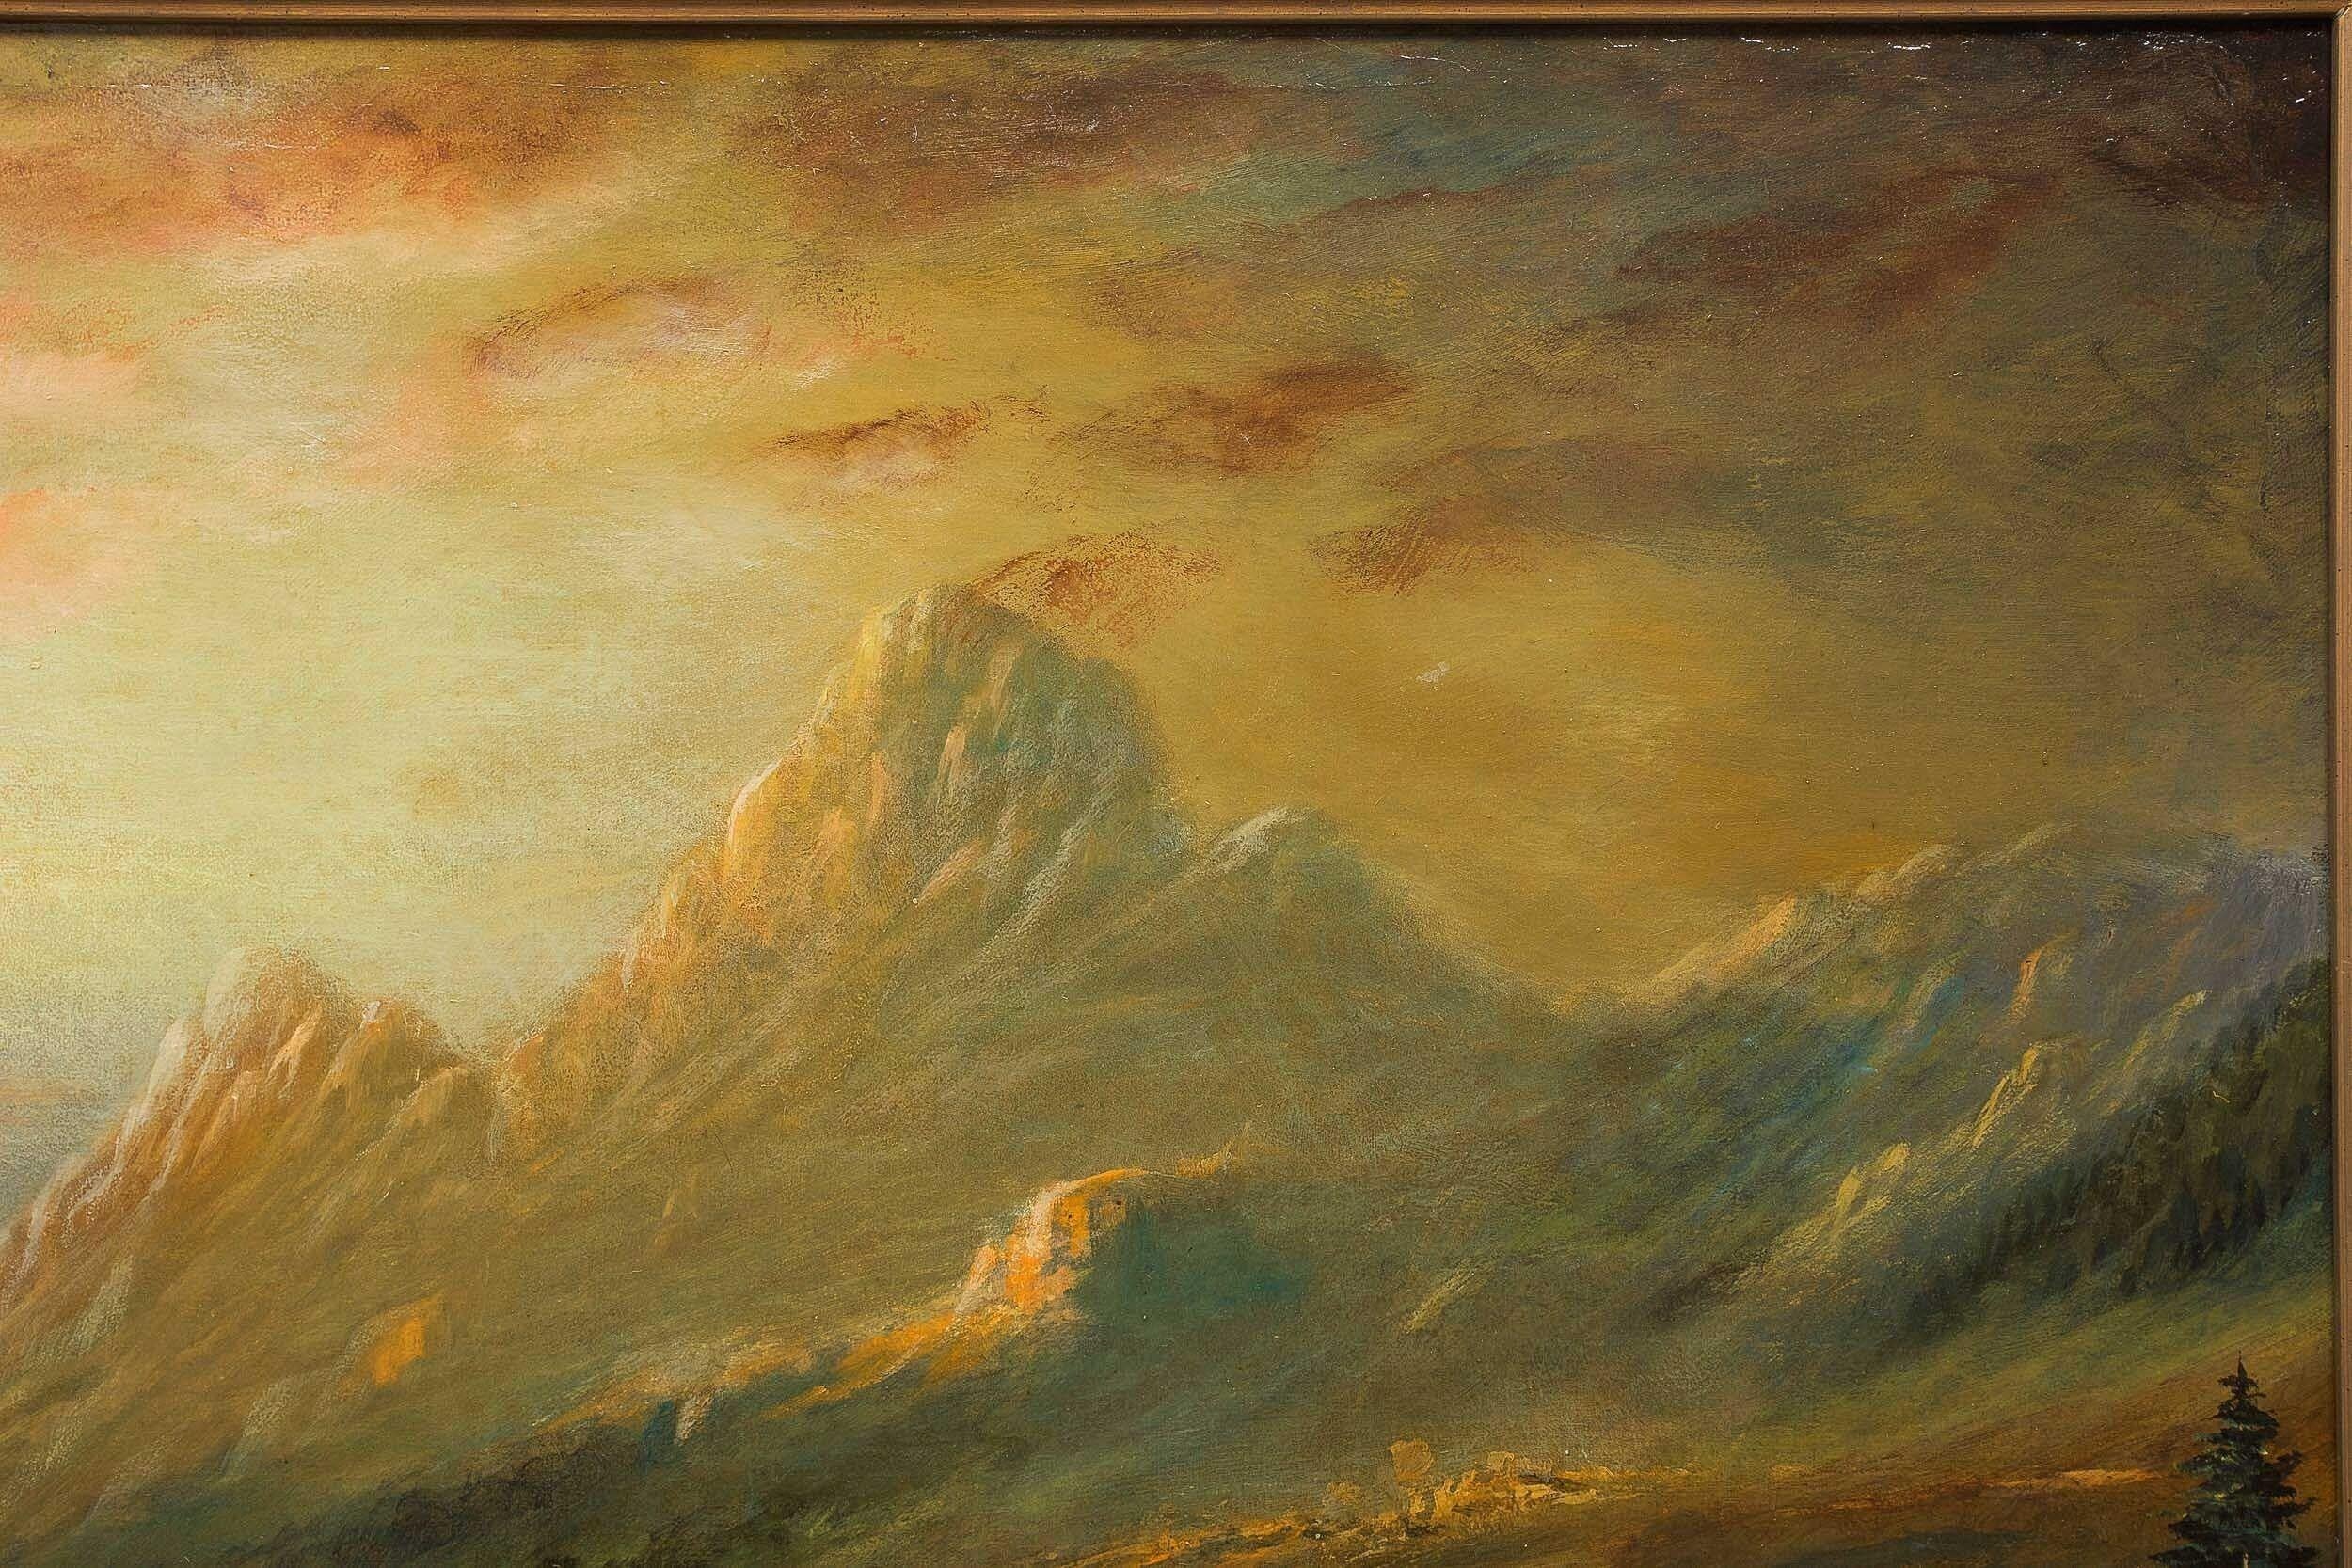 19th Century American Antique Landscape Painting of a Mountain Range by James Hamilton